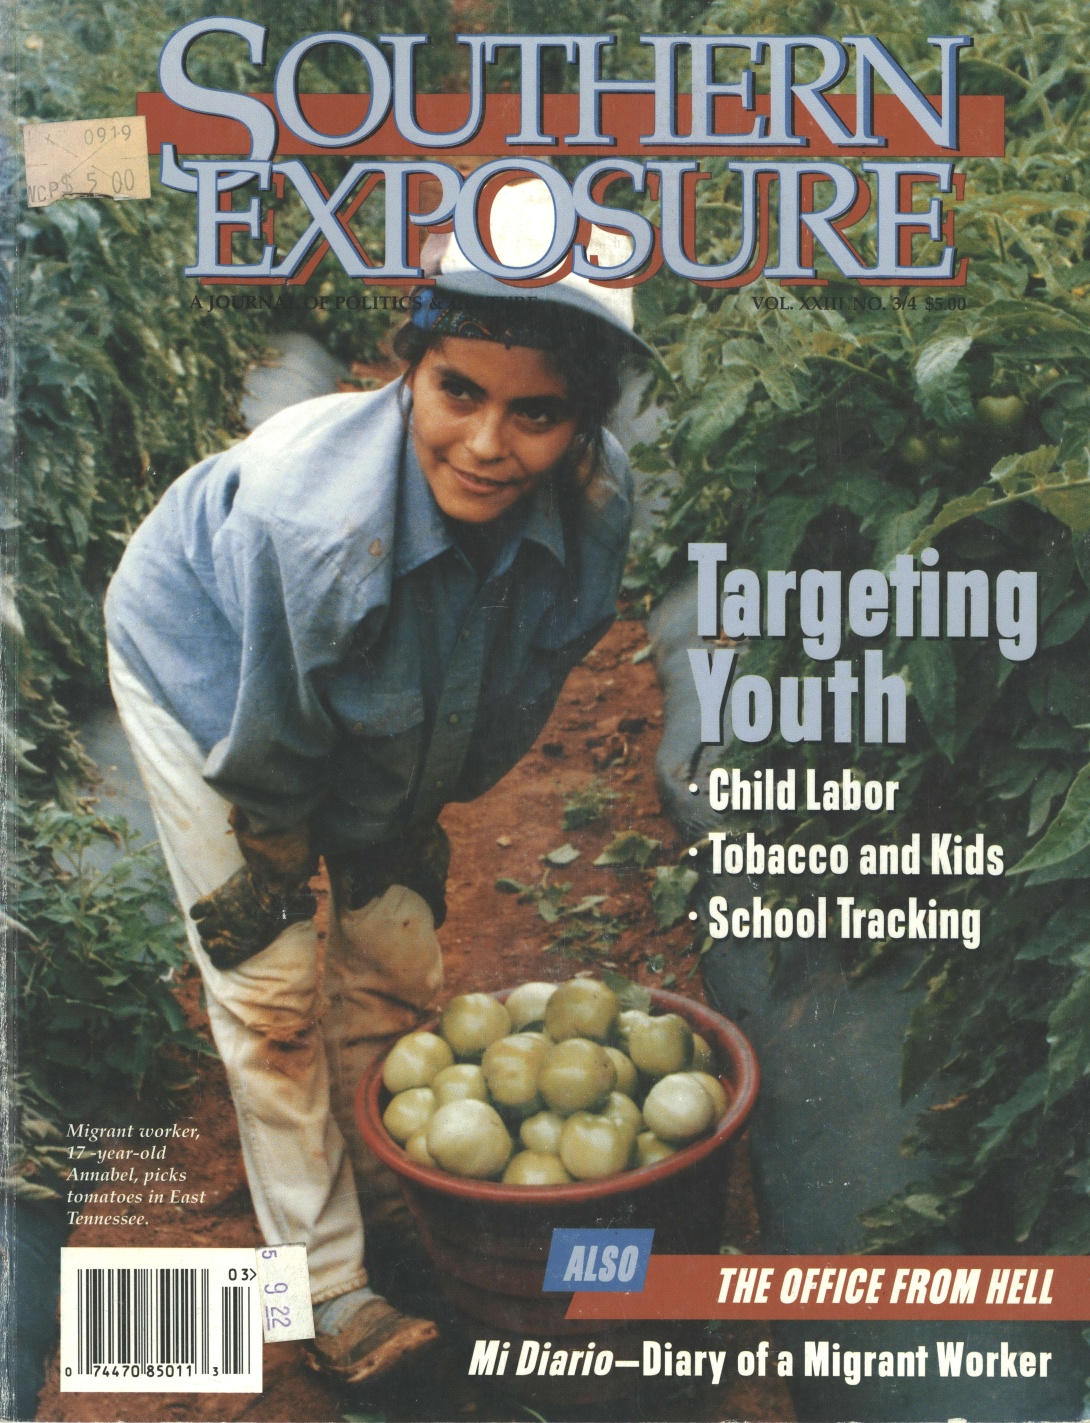 Magazine cover with photo of teenage girl in work clothes picking tomatoes; text reads "Targeting Youth: Child Labor, Tobacco and Kids, School Tracking"